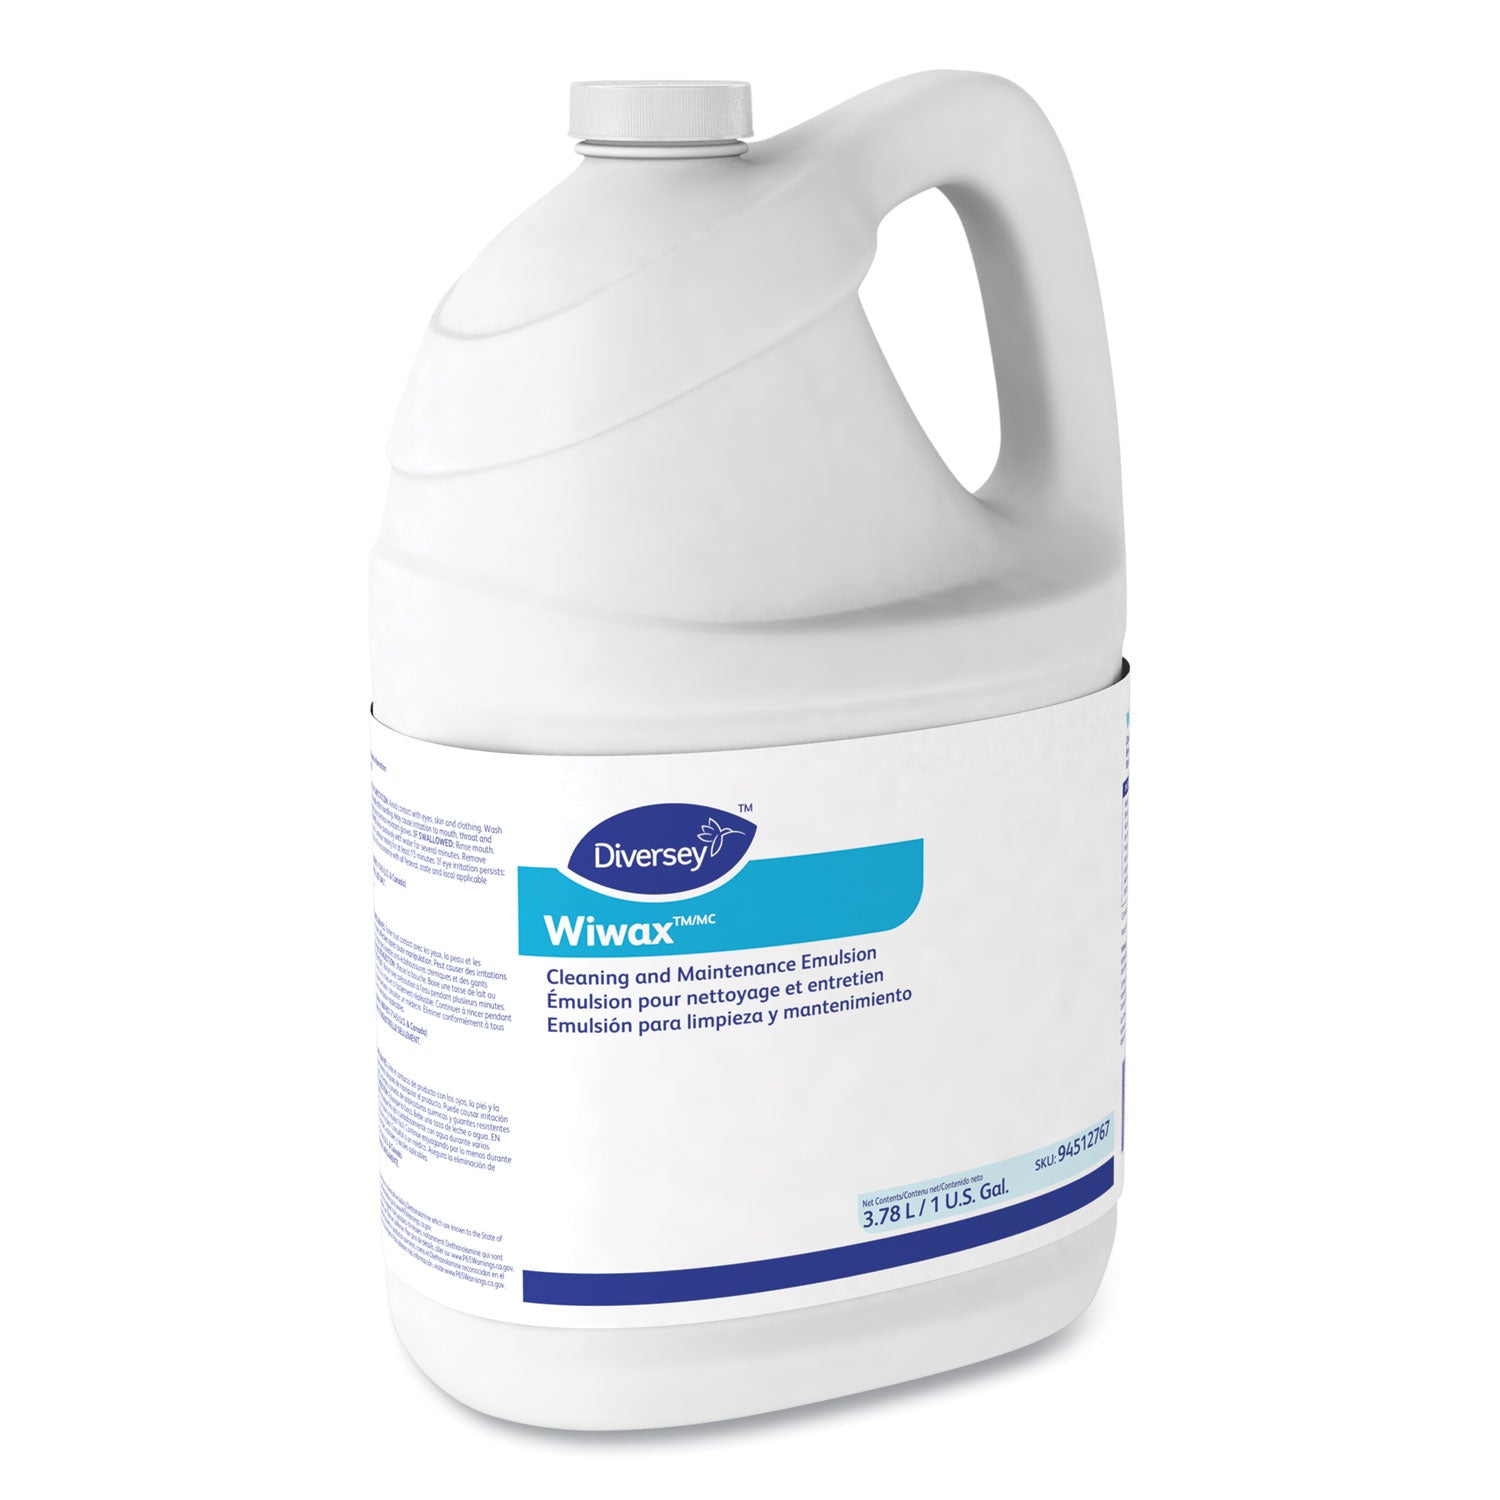 wiwax-cleaning-and-maintenance-solution-liquid-1-gal-bottle-4-carton_dvo94512767 - 4